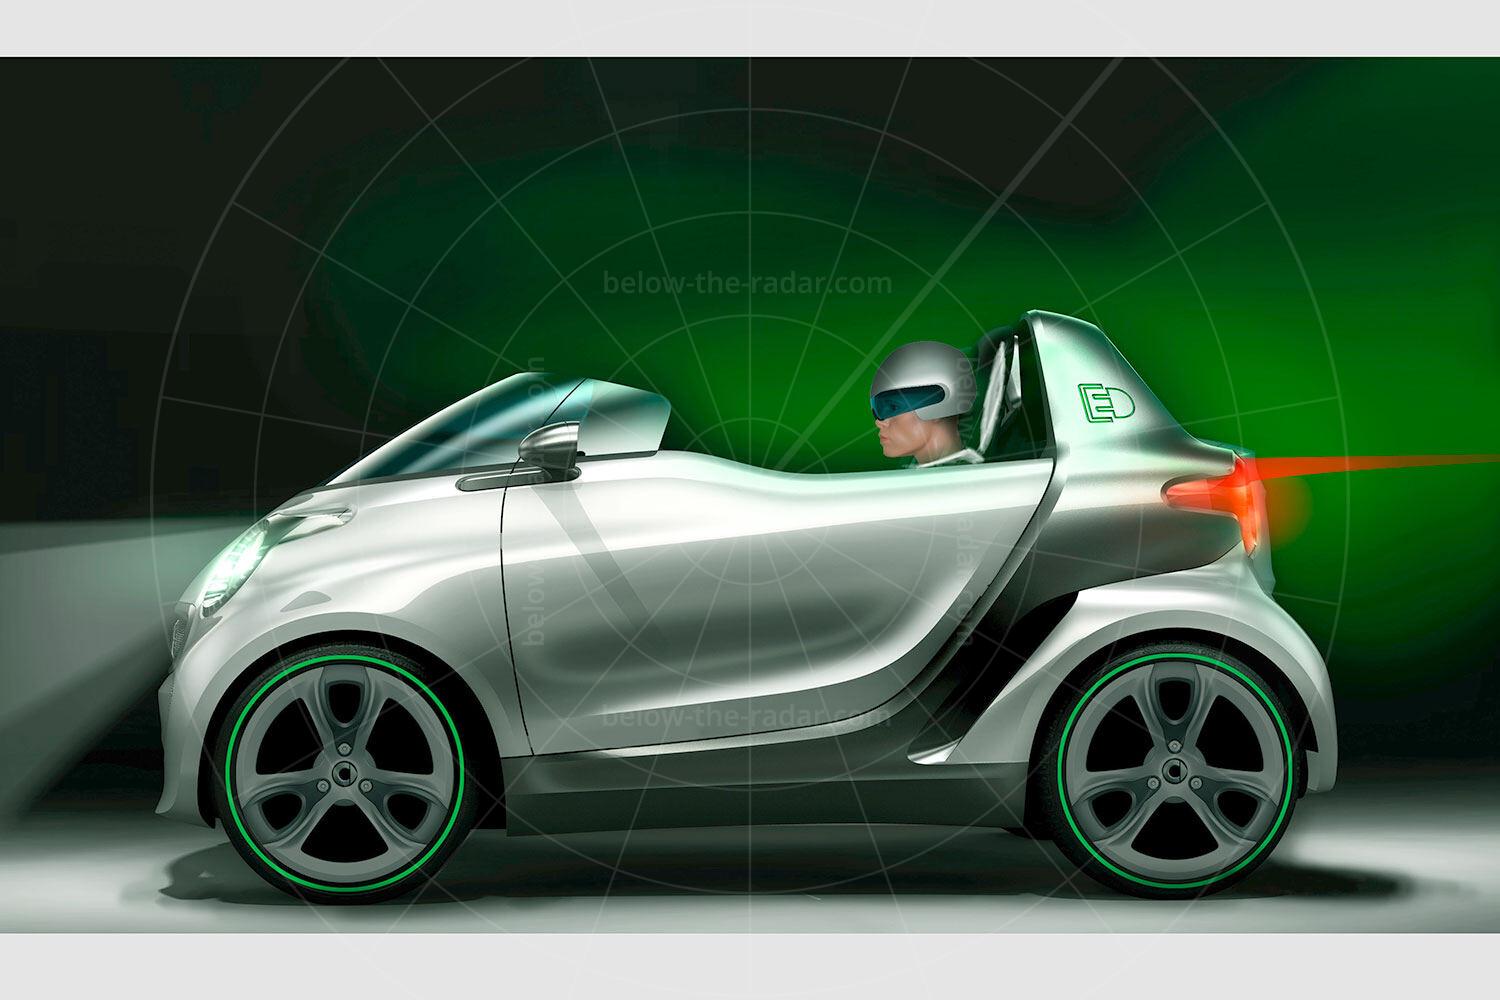 Smart ForSpeed concept Pic: Smart | Smart ForSpeed concept